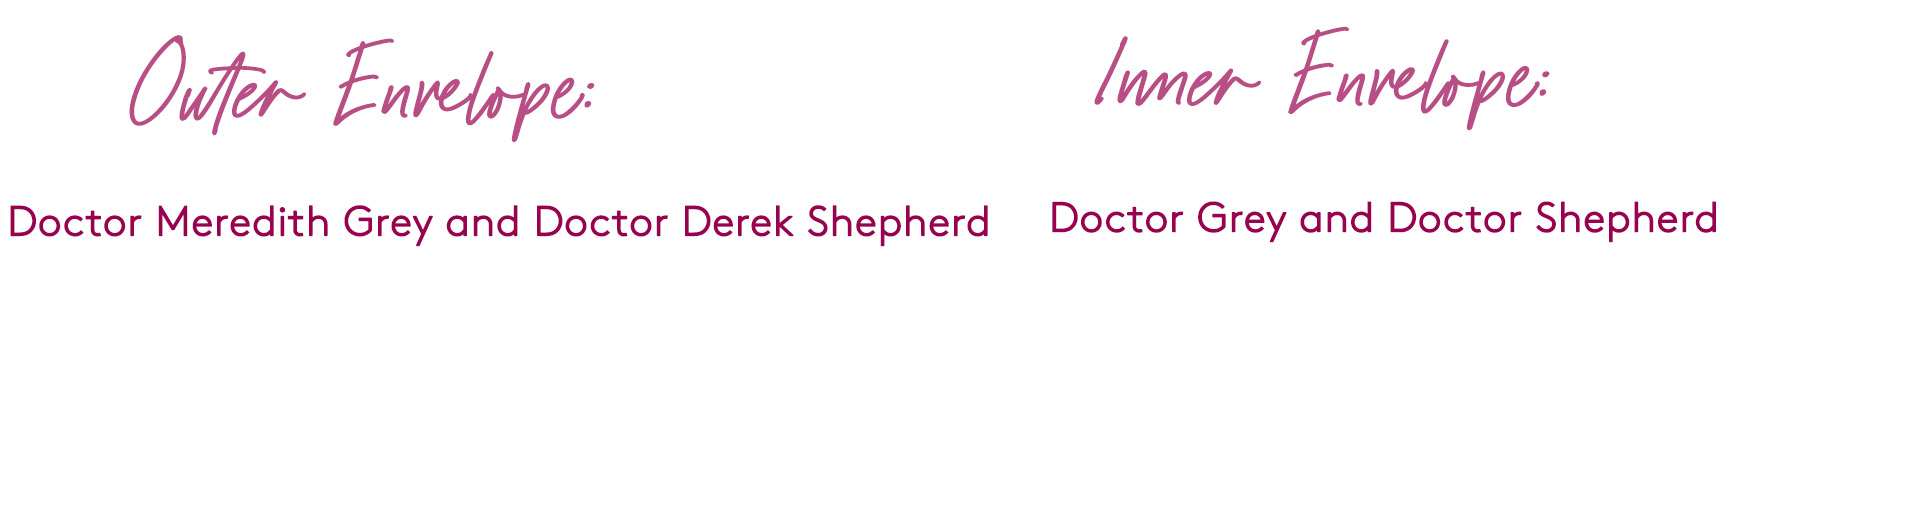 how to address wedding invitation when both are doctors with different last names